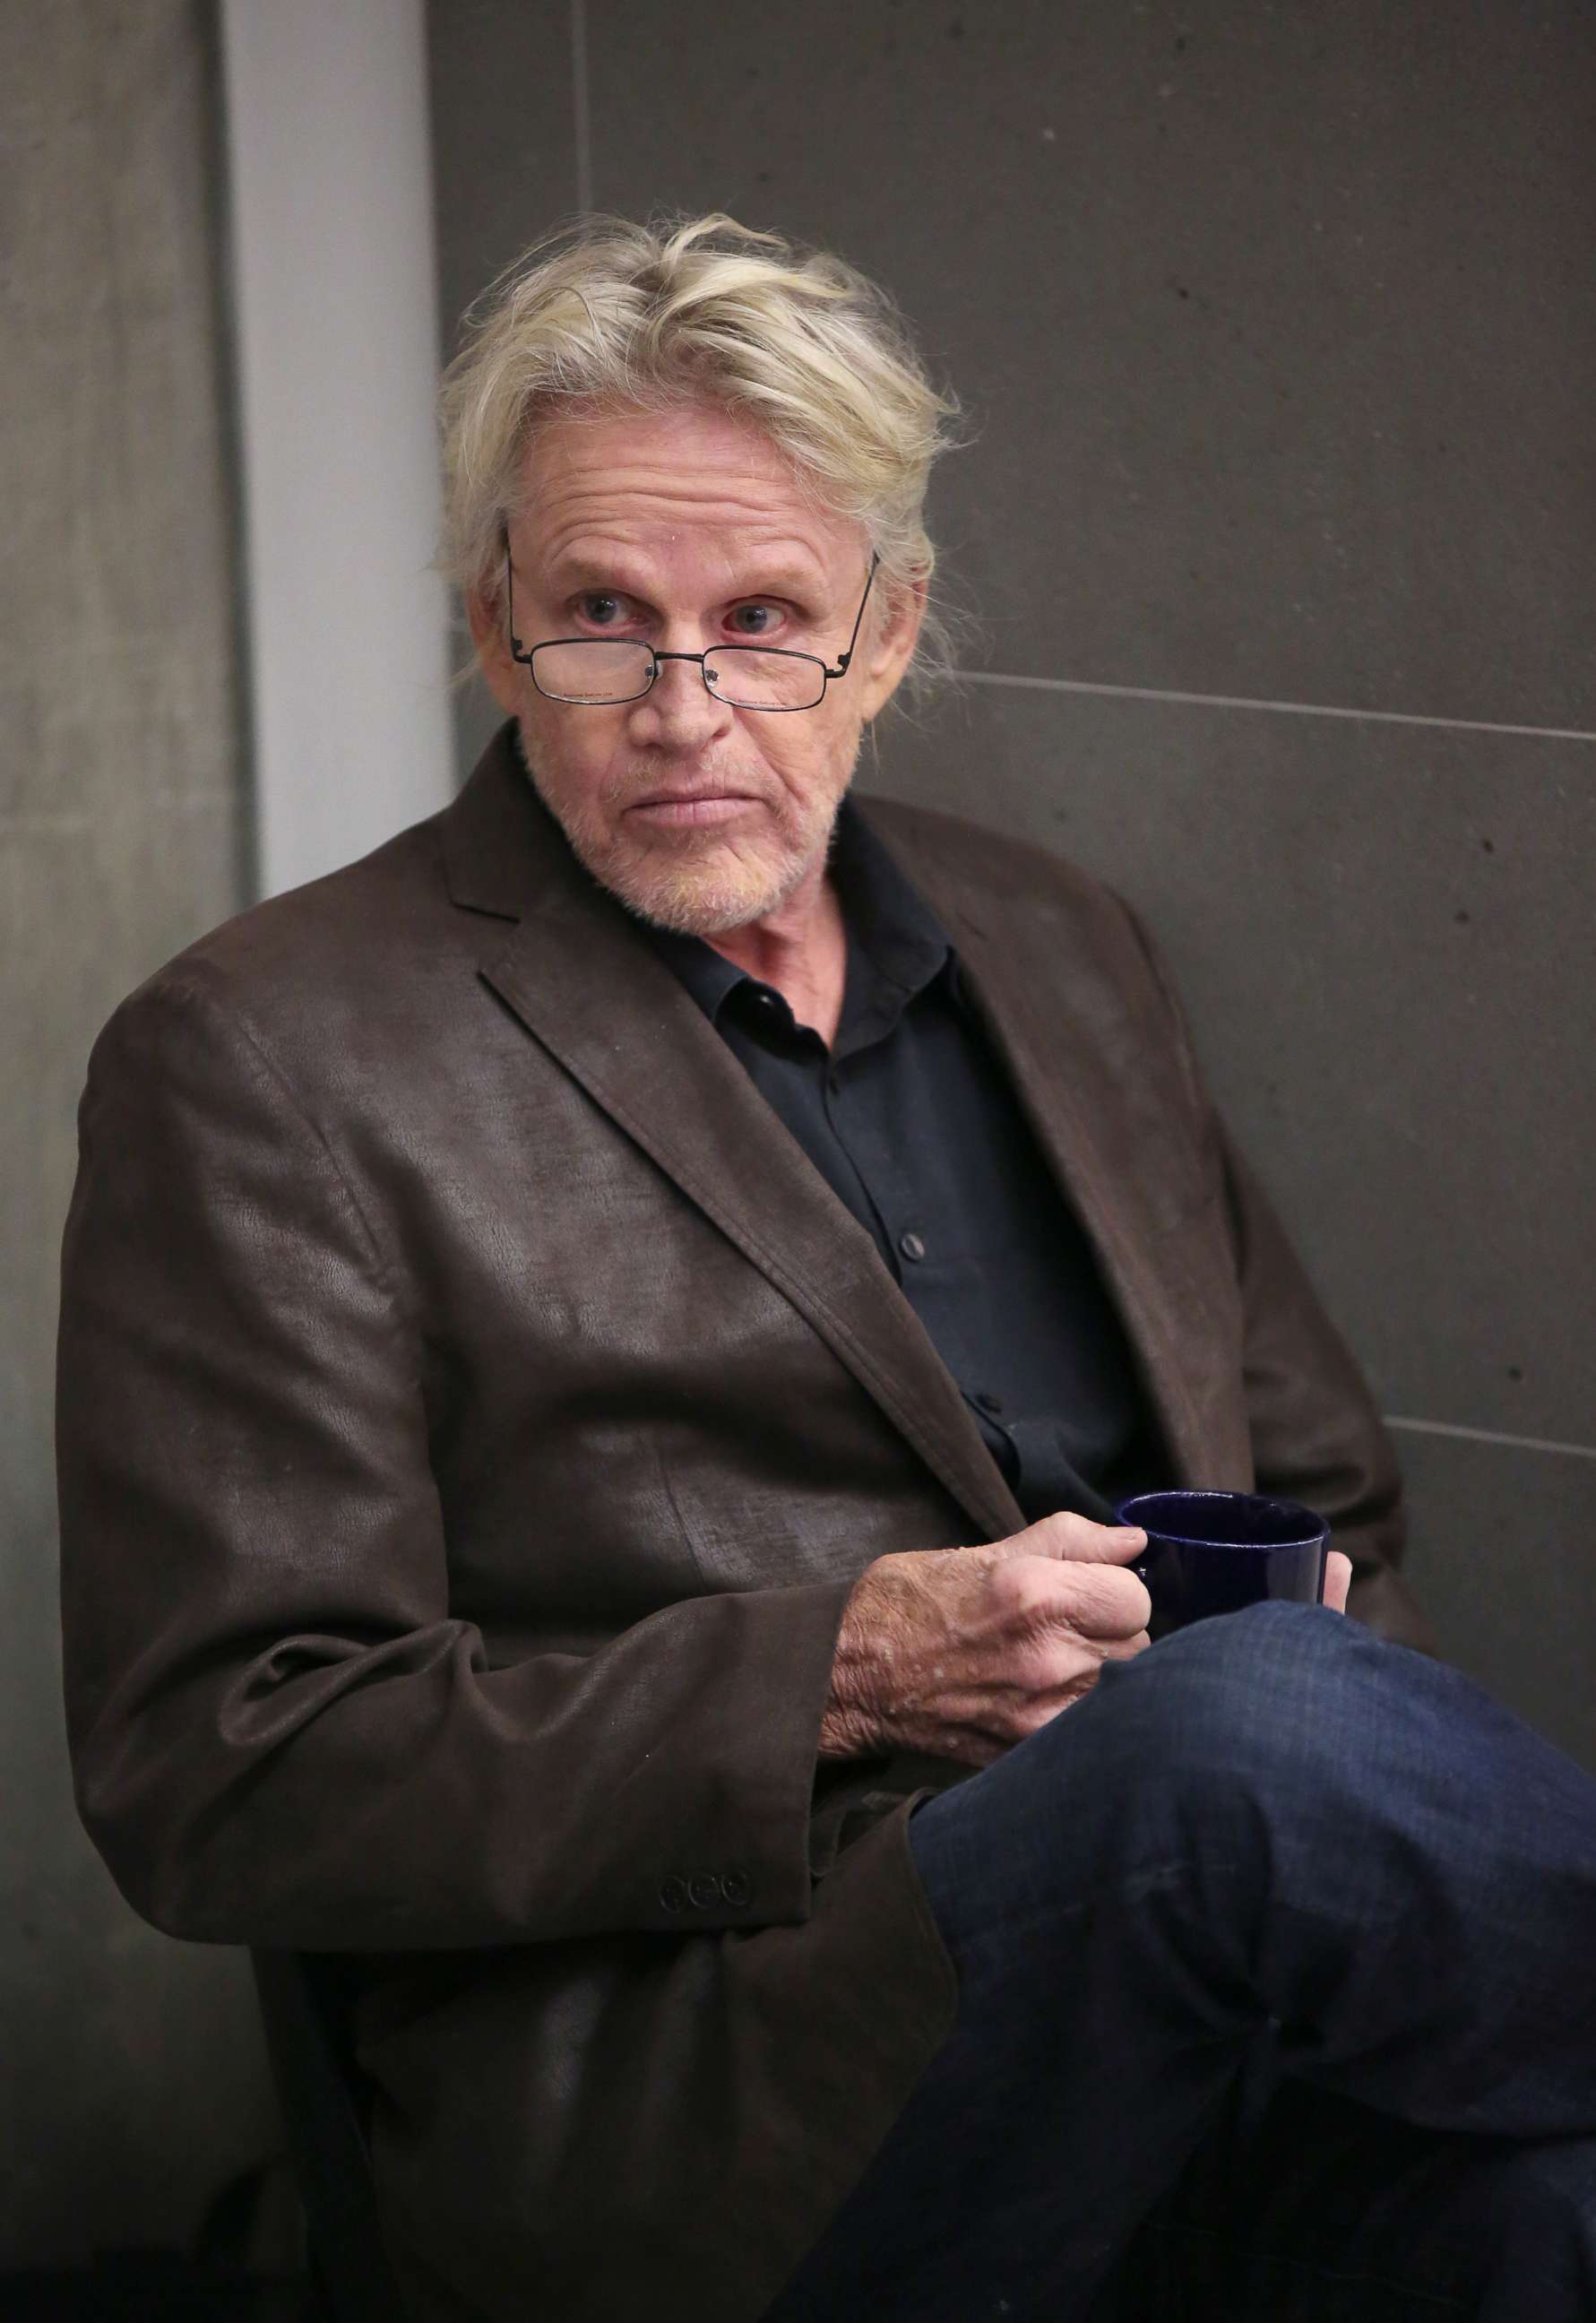 PHOTO: In this Sept. 17, 2019 file photo Gary Busey is seen at The Yard Herald Square in New York City.